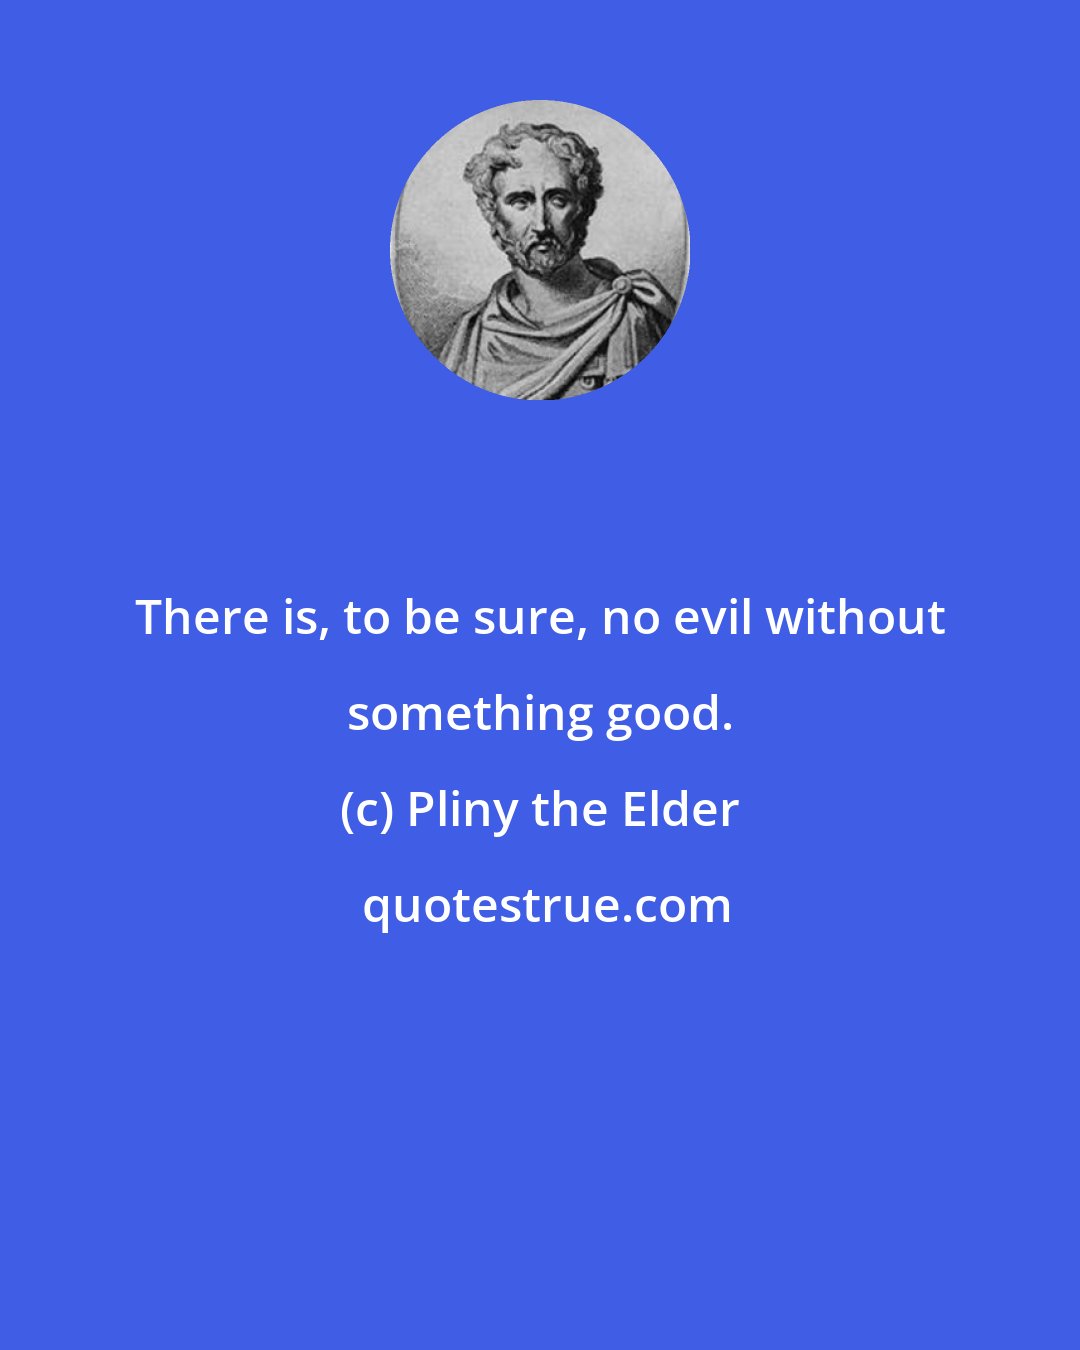 Pliny the Elder: There is, to be sure, no evil without something good.